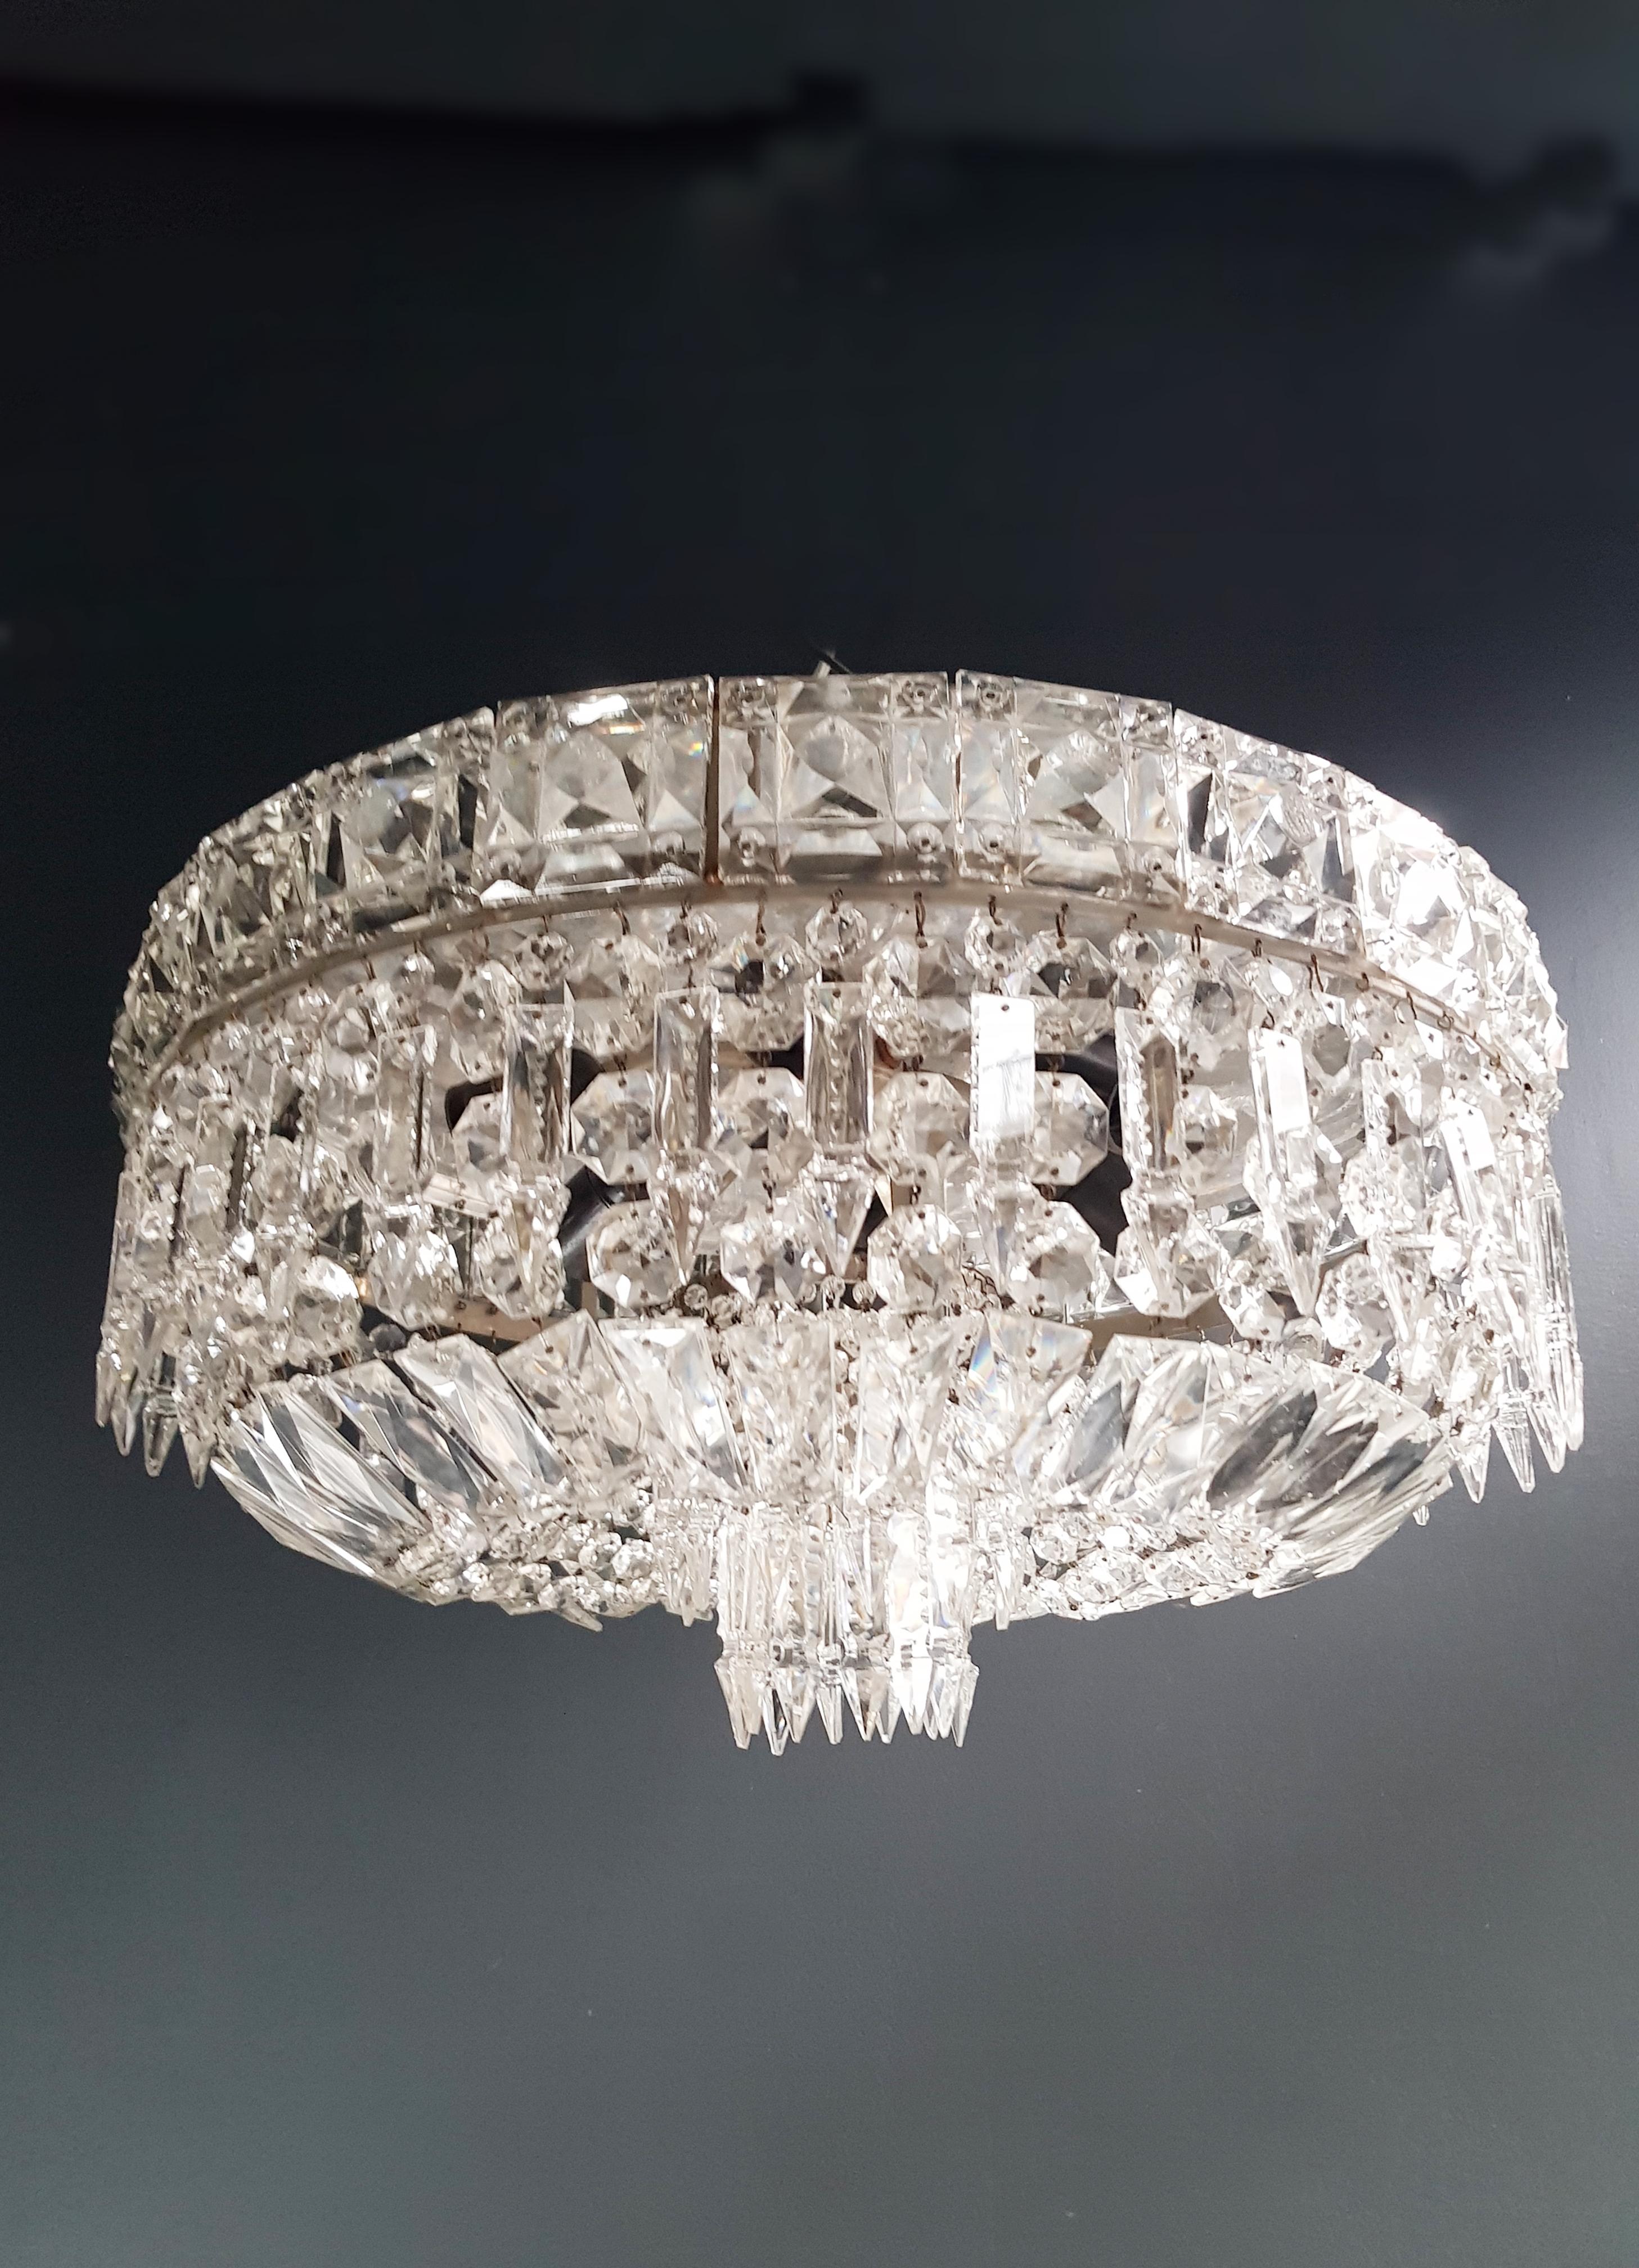 Low ceiling crystal chandelier brass.
Cabling completely renewed. Crystal hand knotted.
Measures: Total height 40 cm, height without chain 40 cm, diameter 50 cm. weight (approximately) 9 kg.

Number of lights: 6-light bulb sockets: E27
Brass